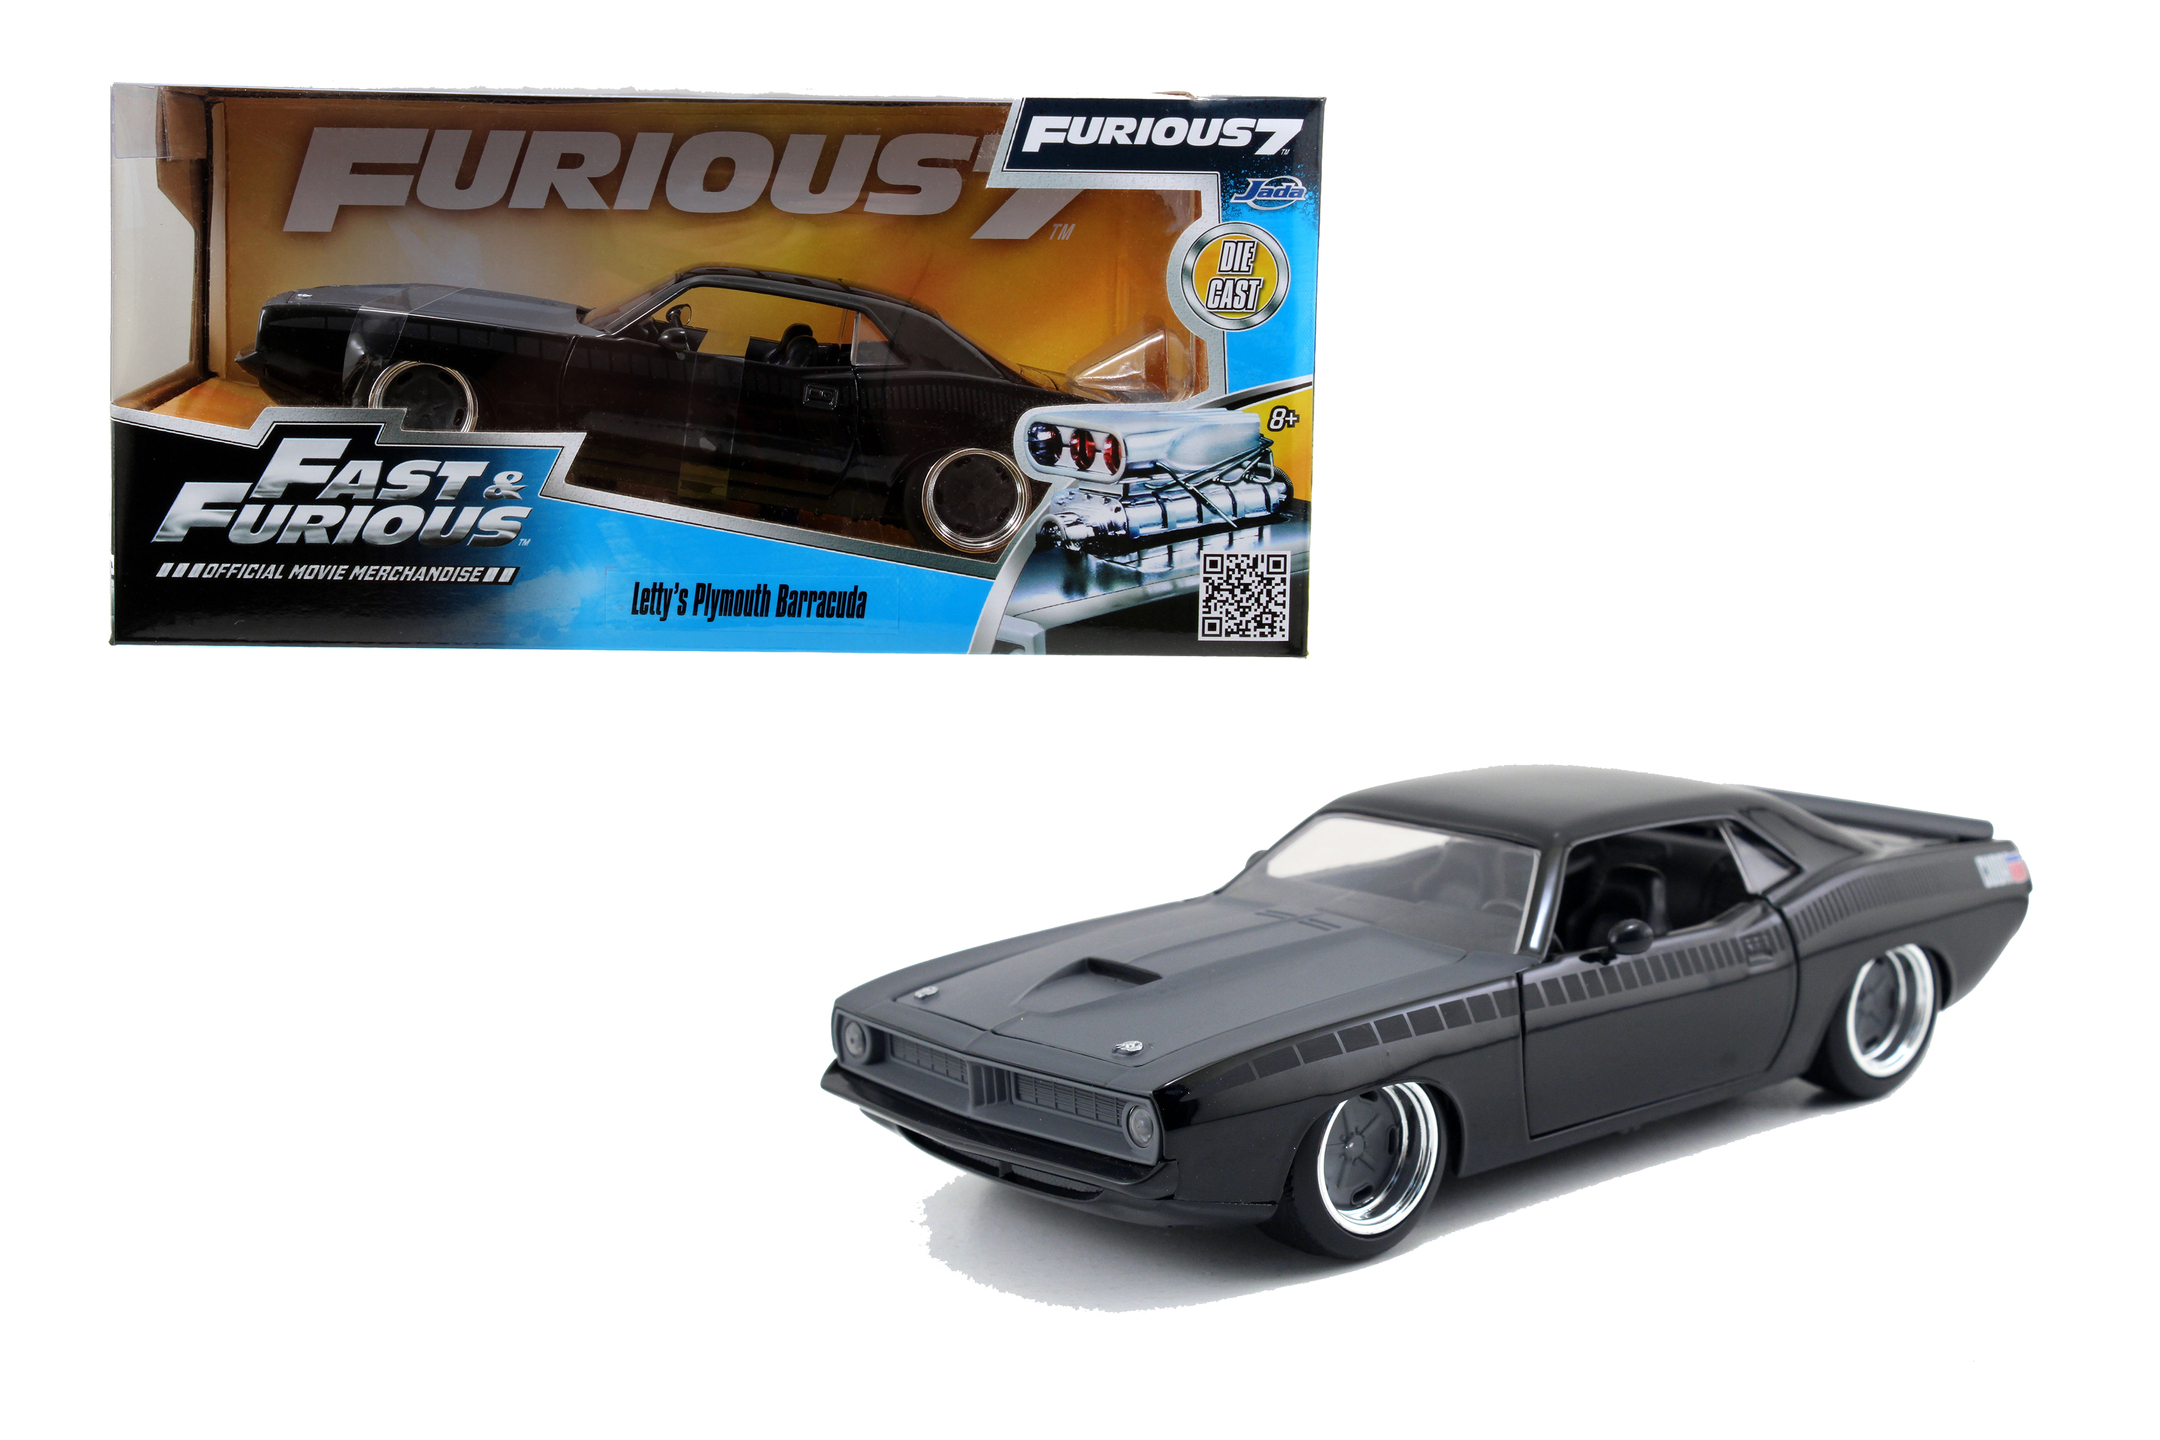 Fast & Furious 1970 Plymouth 1:24